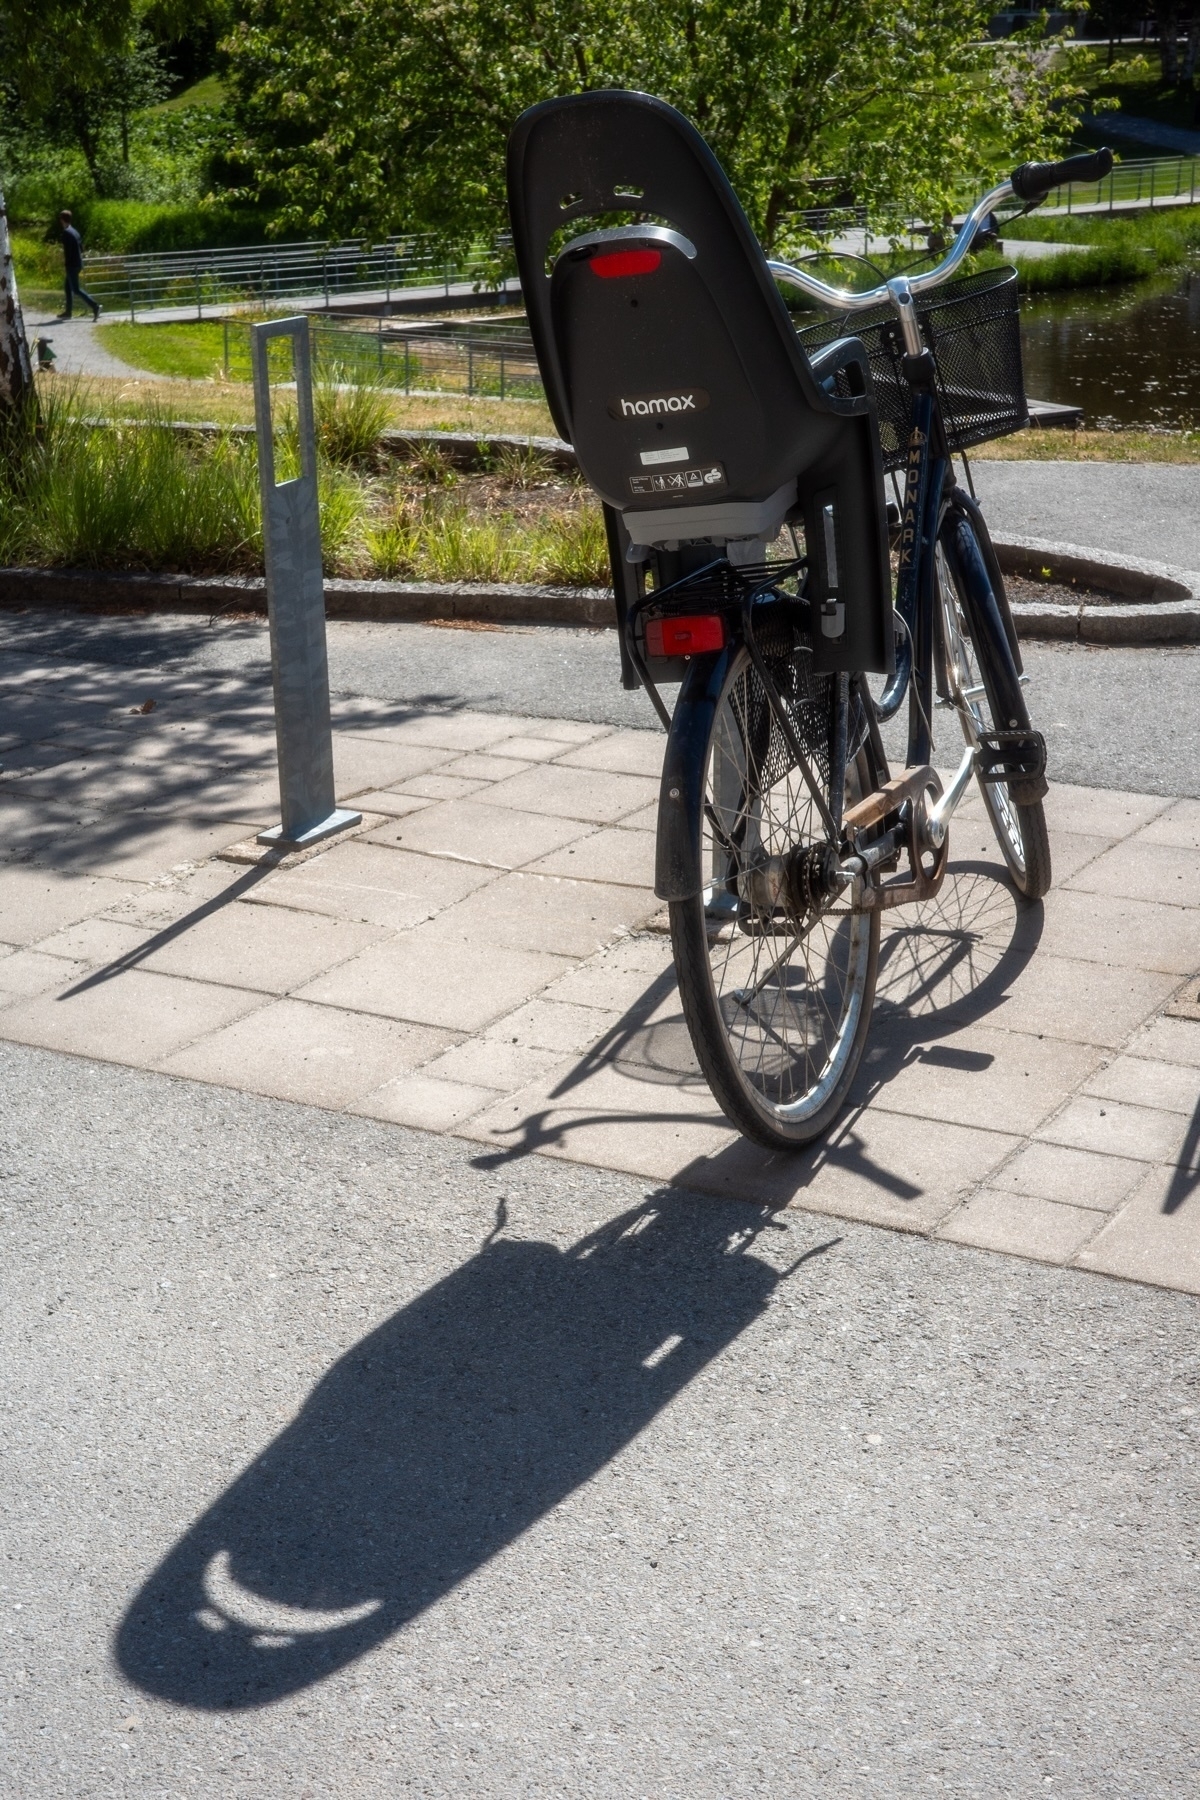 A bicycle with a child seat mounted on the back parked on a paved path in a park. A shadow of the bicycle and child seat is cast on the ground.